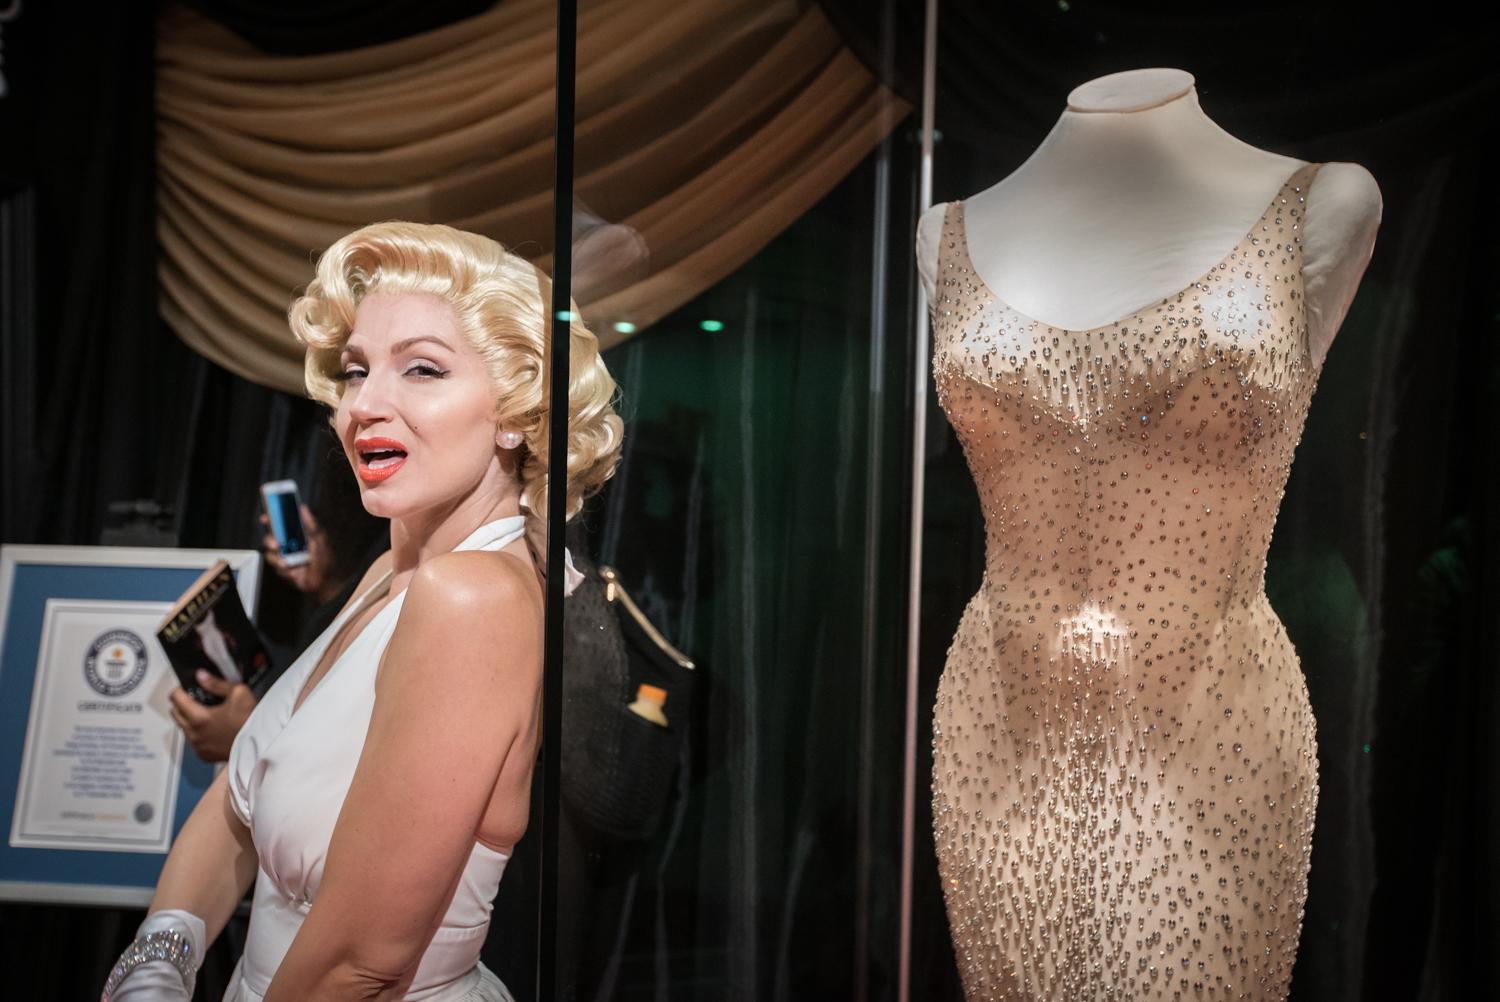 World's most expensive dress, worn by Marilyn Monroe for JFK, goes on display